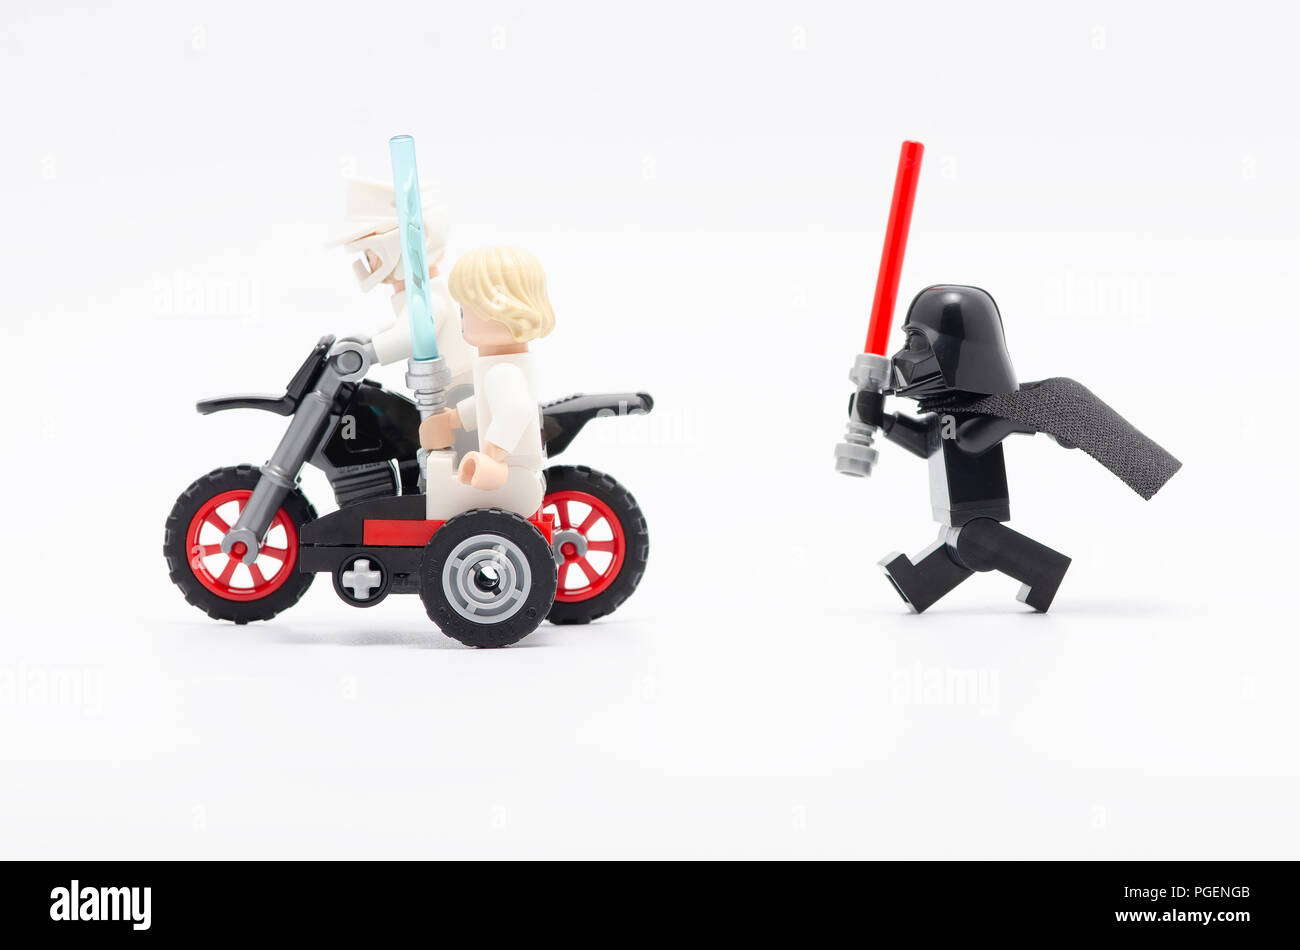 MALAYSIA, jul 19, 2018. Lego darth vader chasing luke skywalker. Lego  minifigures are manufactured by The Lego Group Stock Photo - Alamy